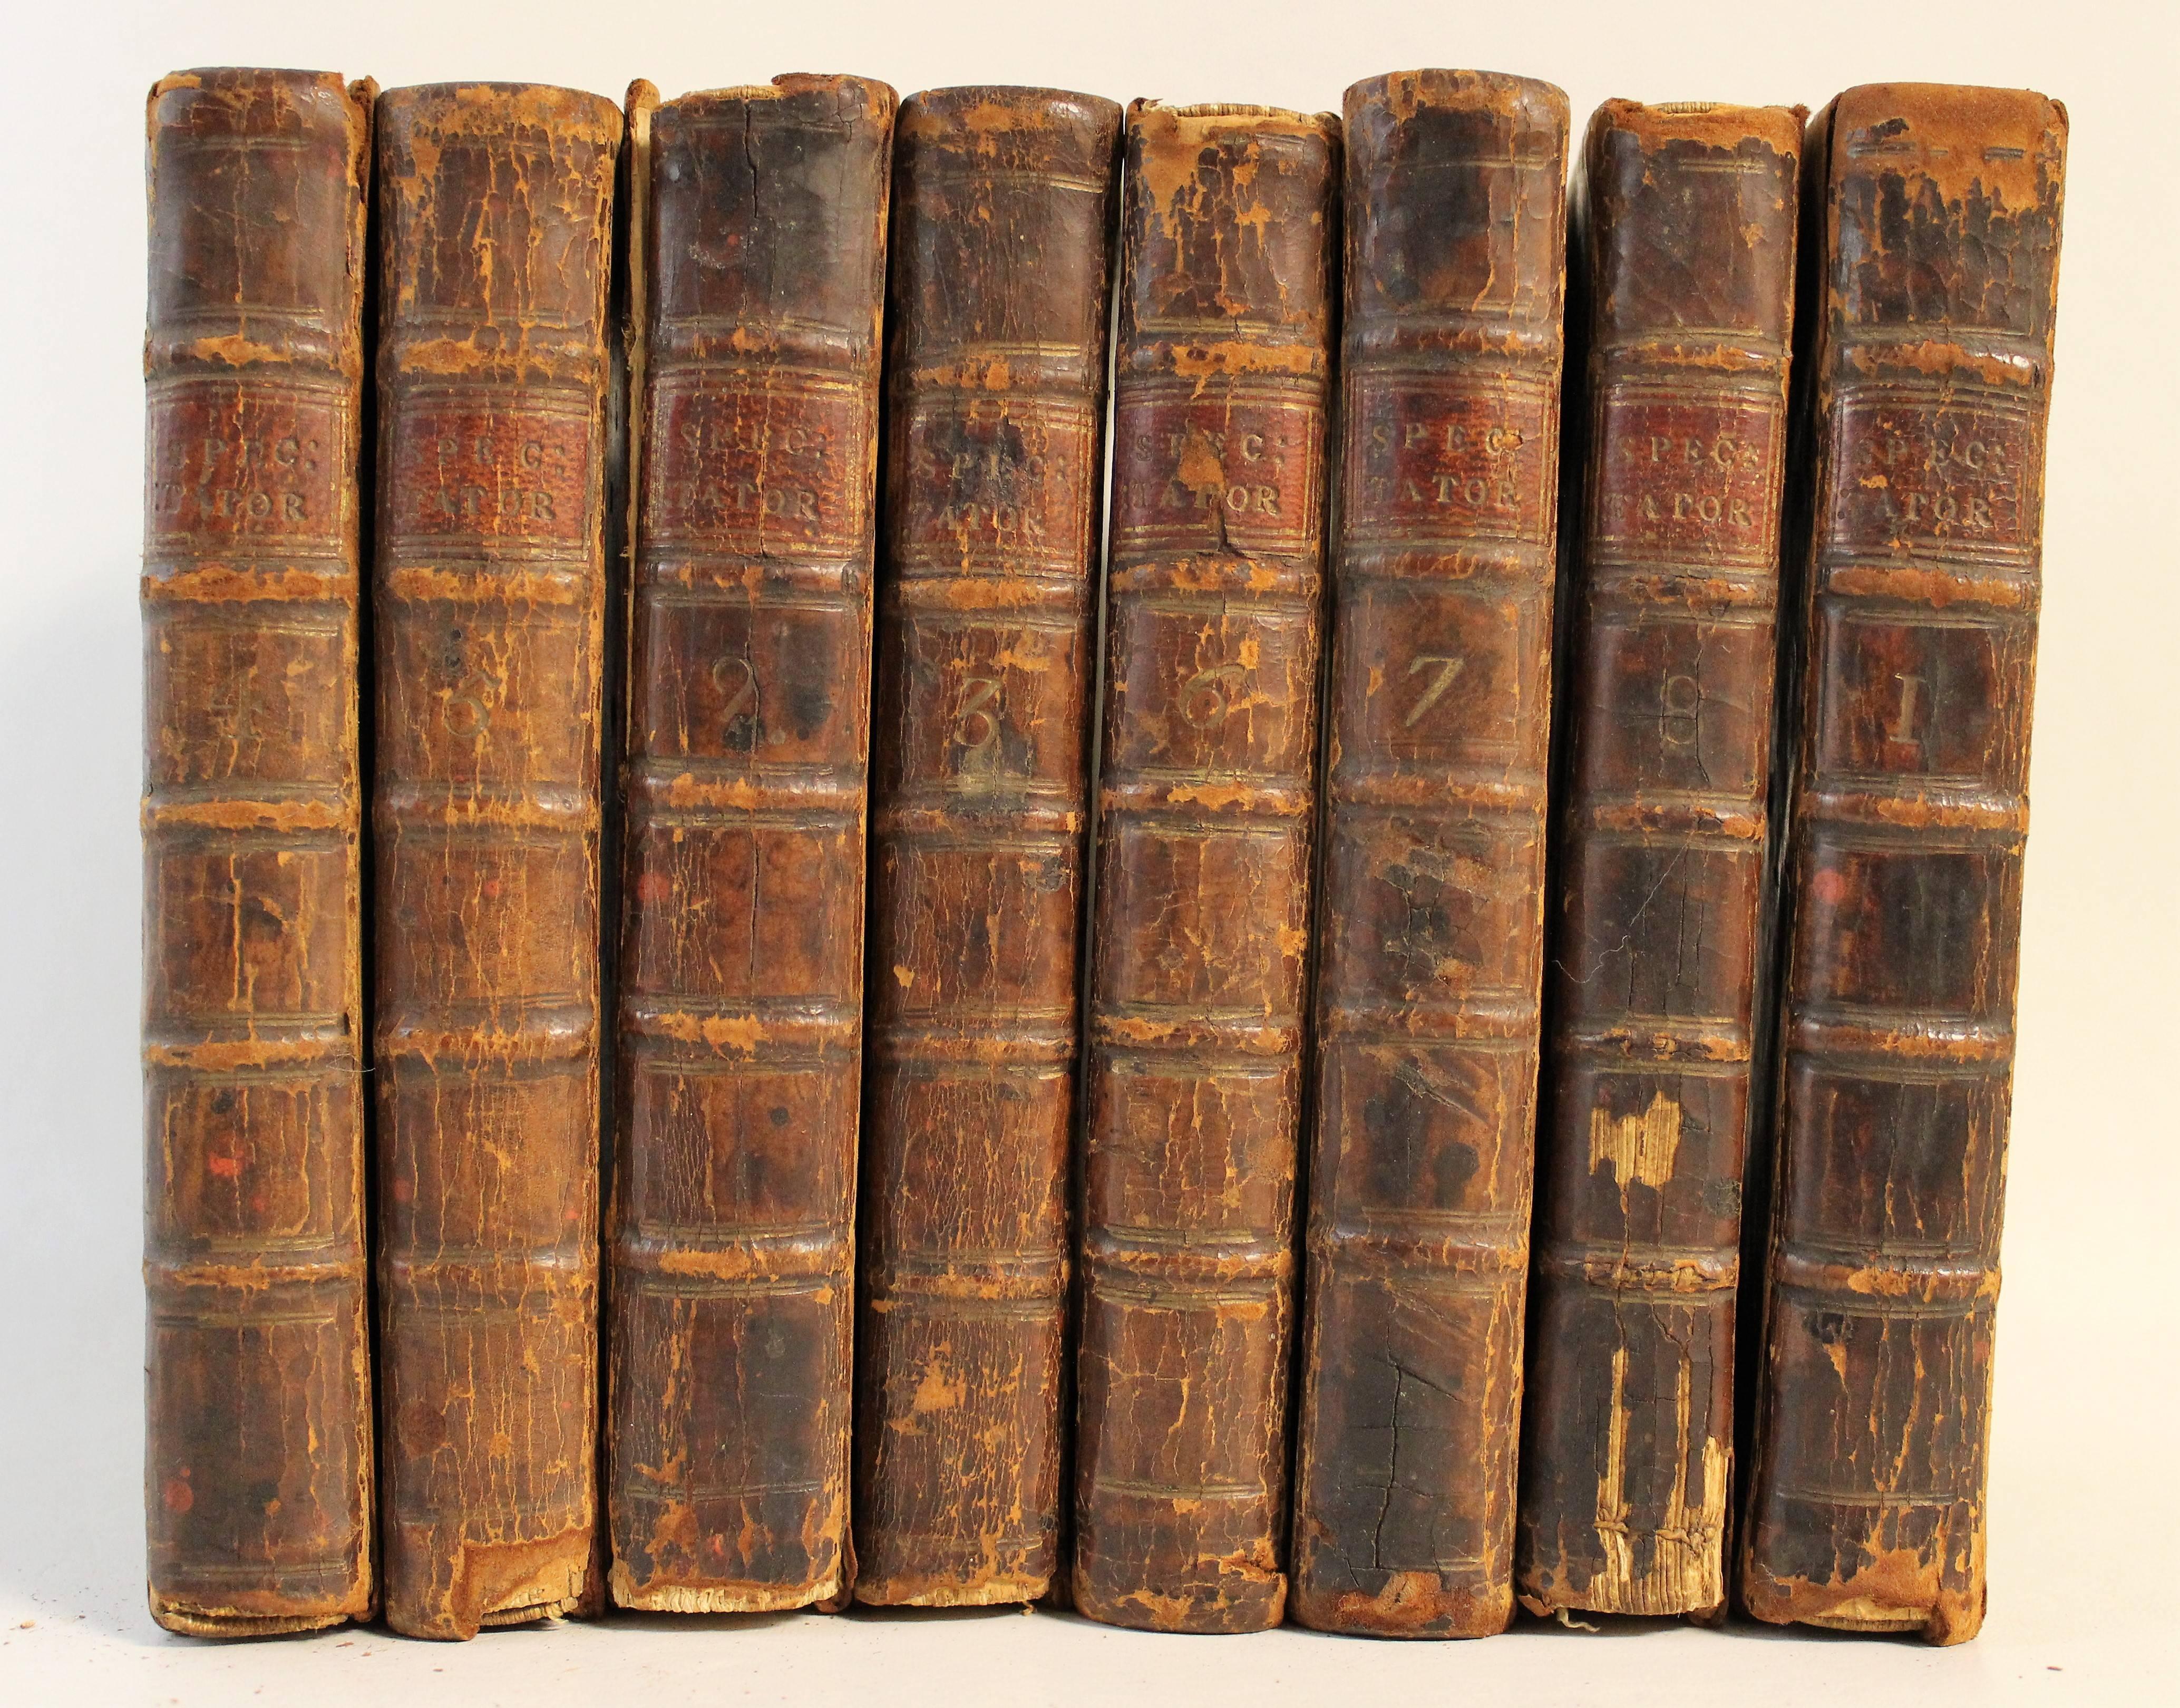 The Spectator by Joseph Addison and Sir Richard Steele. Volumes 1,3,4,5,6,7,8,9 from 1754.